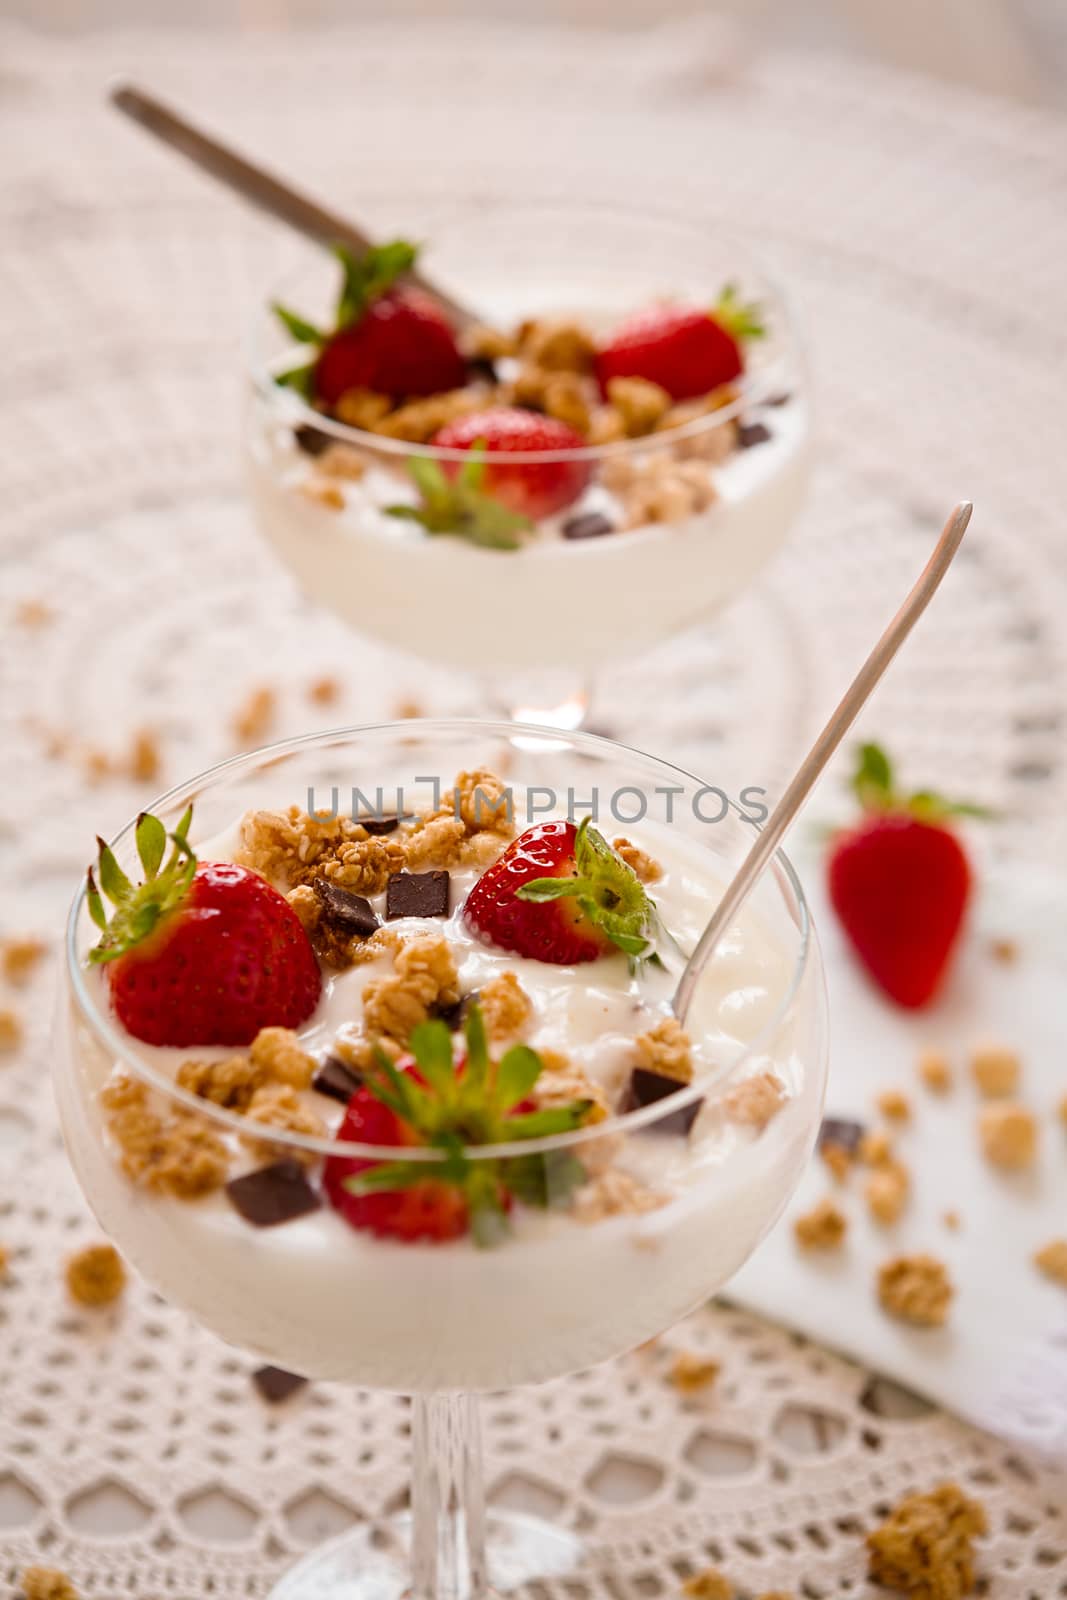 Dessert with strawberries cereals and chocolate flakes inside a cup with plain yogurt